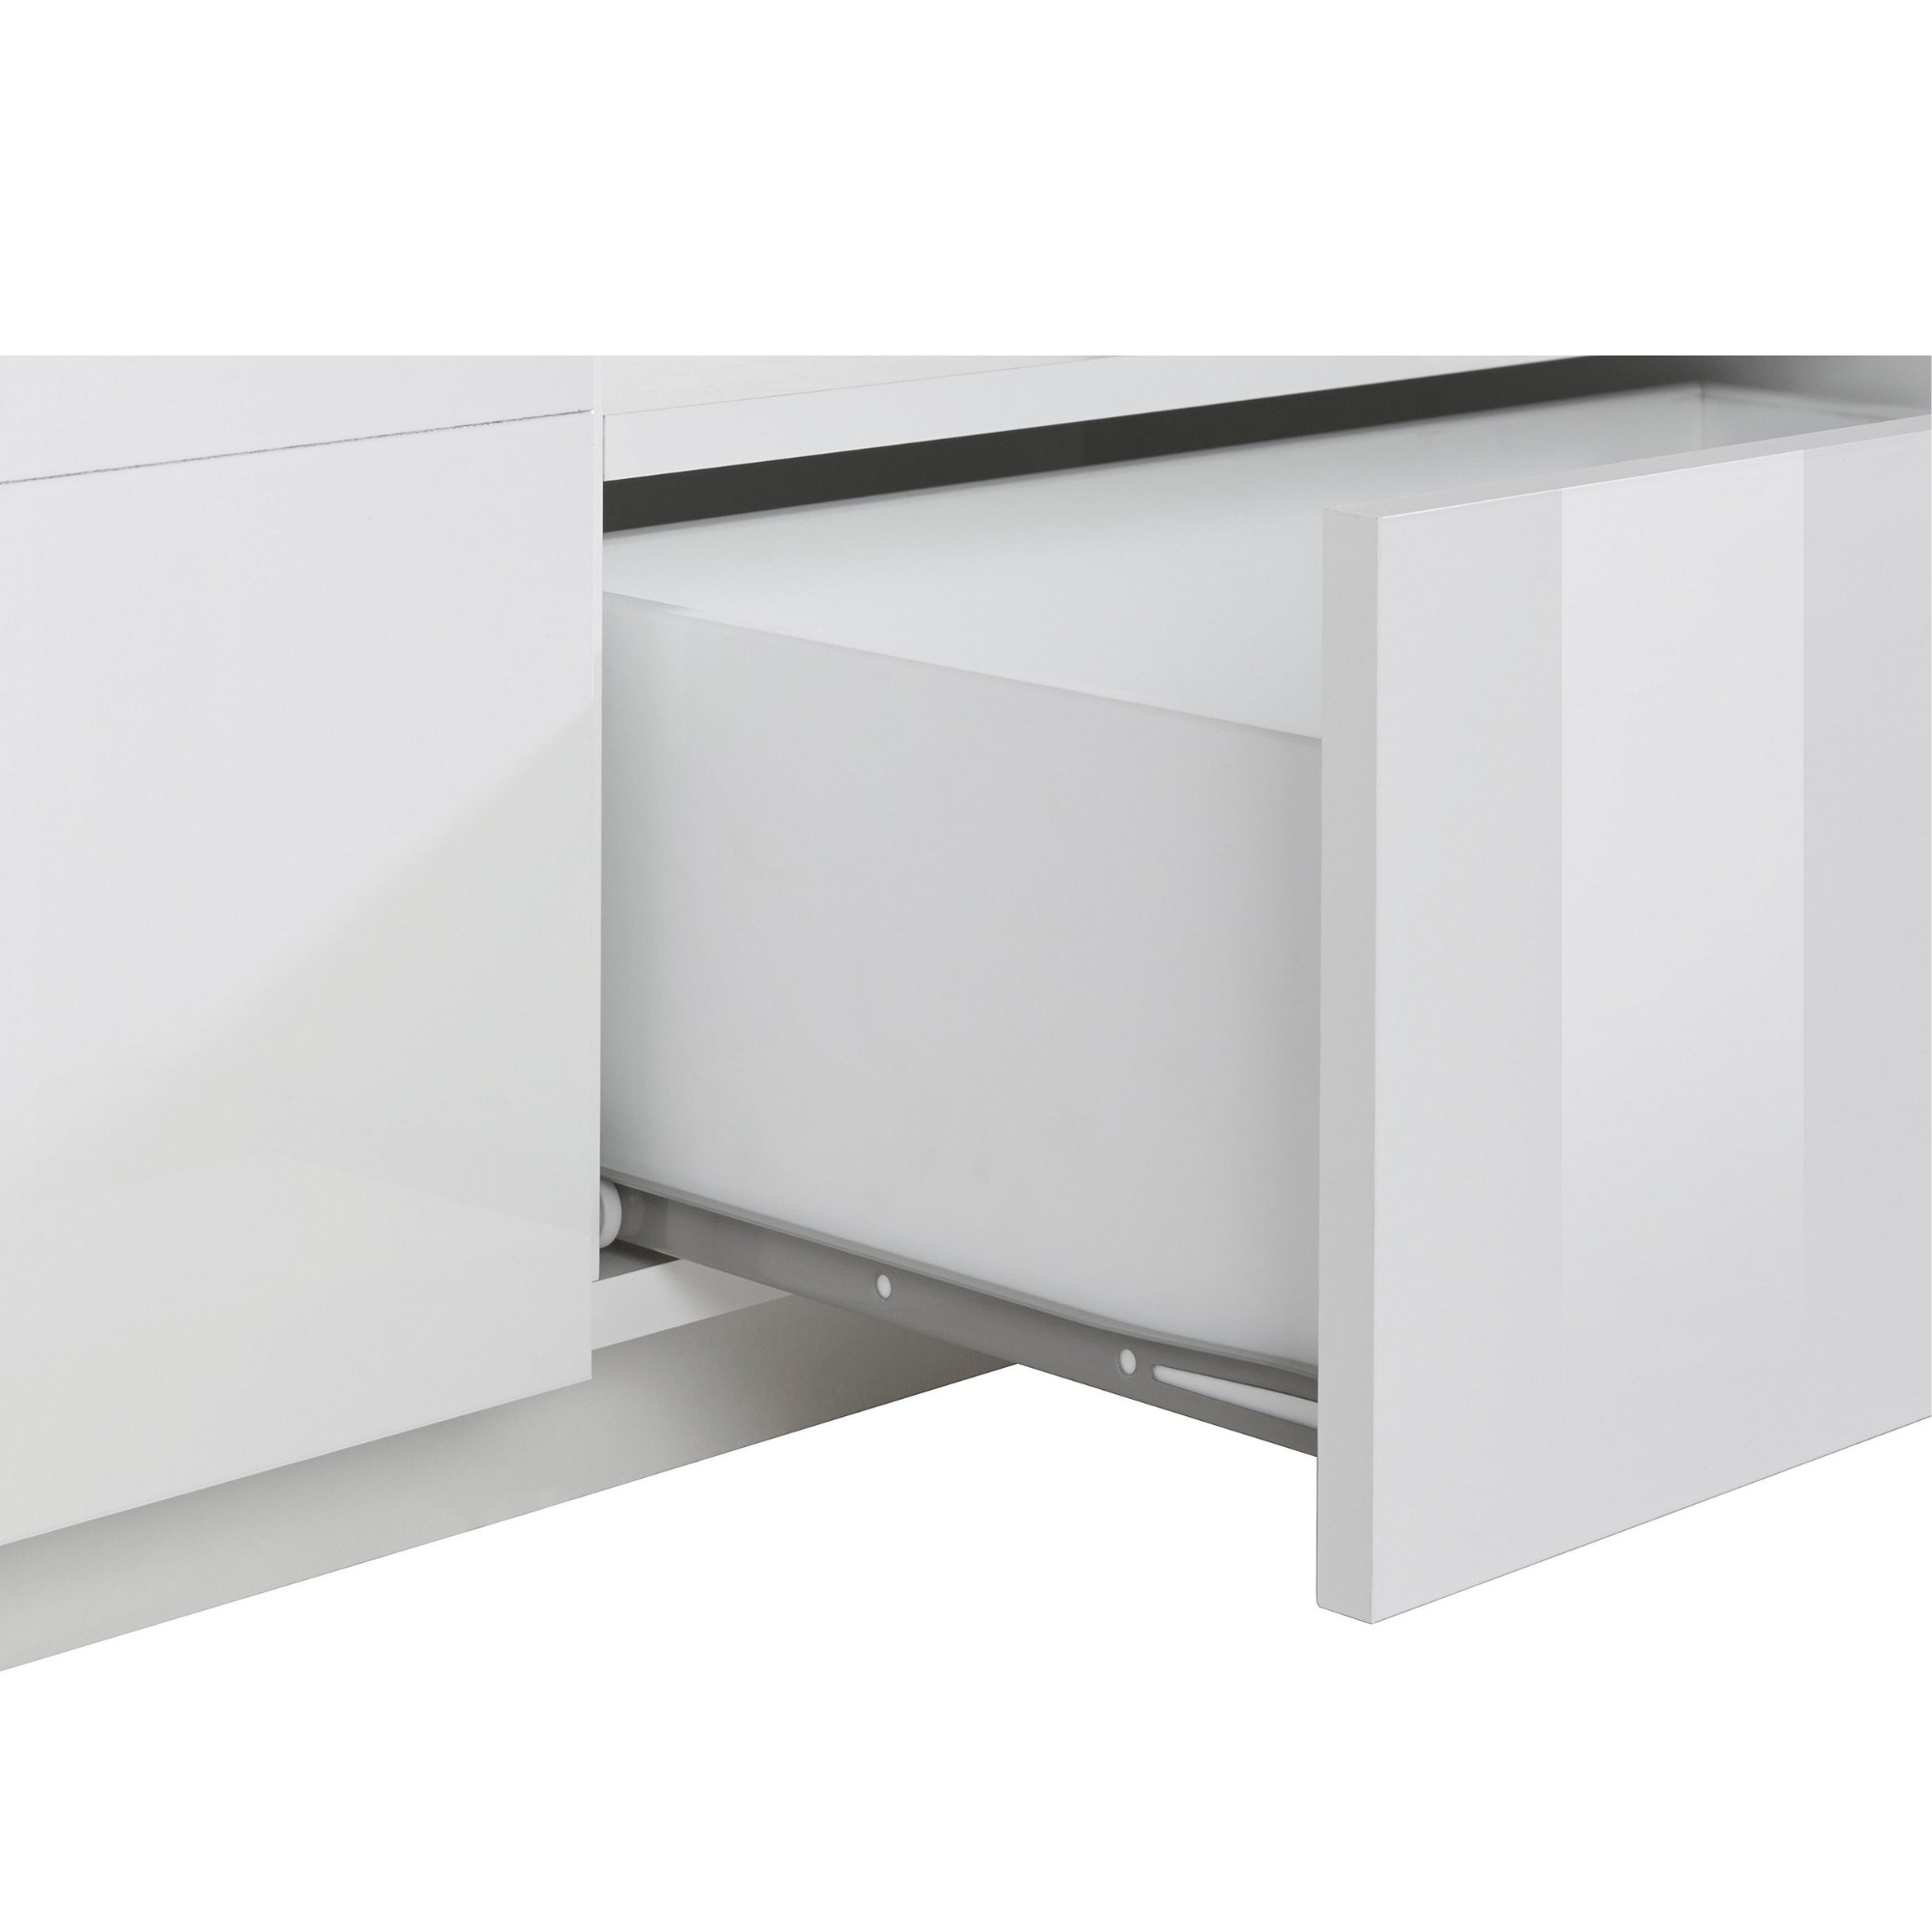 ALIEN TV Stand - High Gloss White with Wood Grain Finish - 86.6 Inches Wide - Furniture.Agency